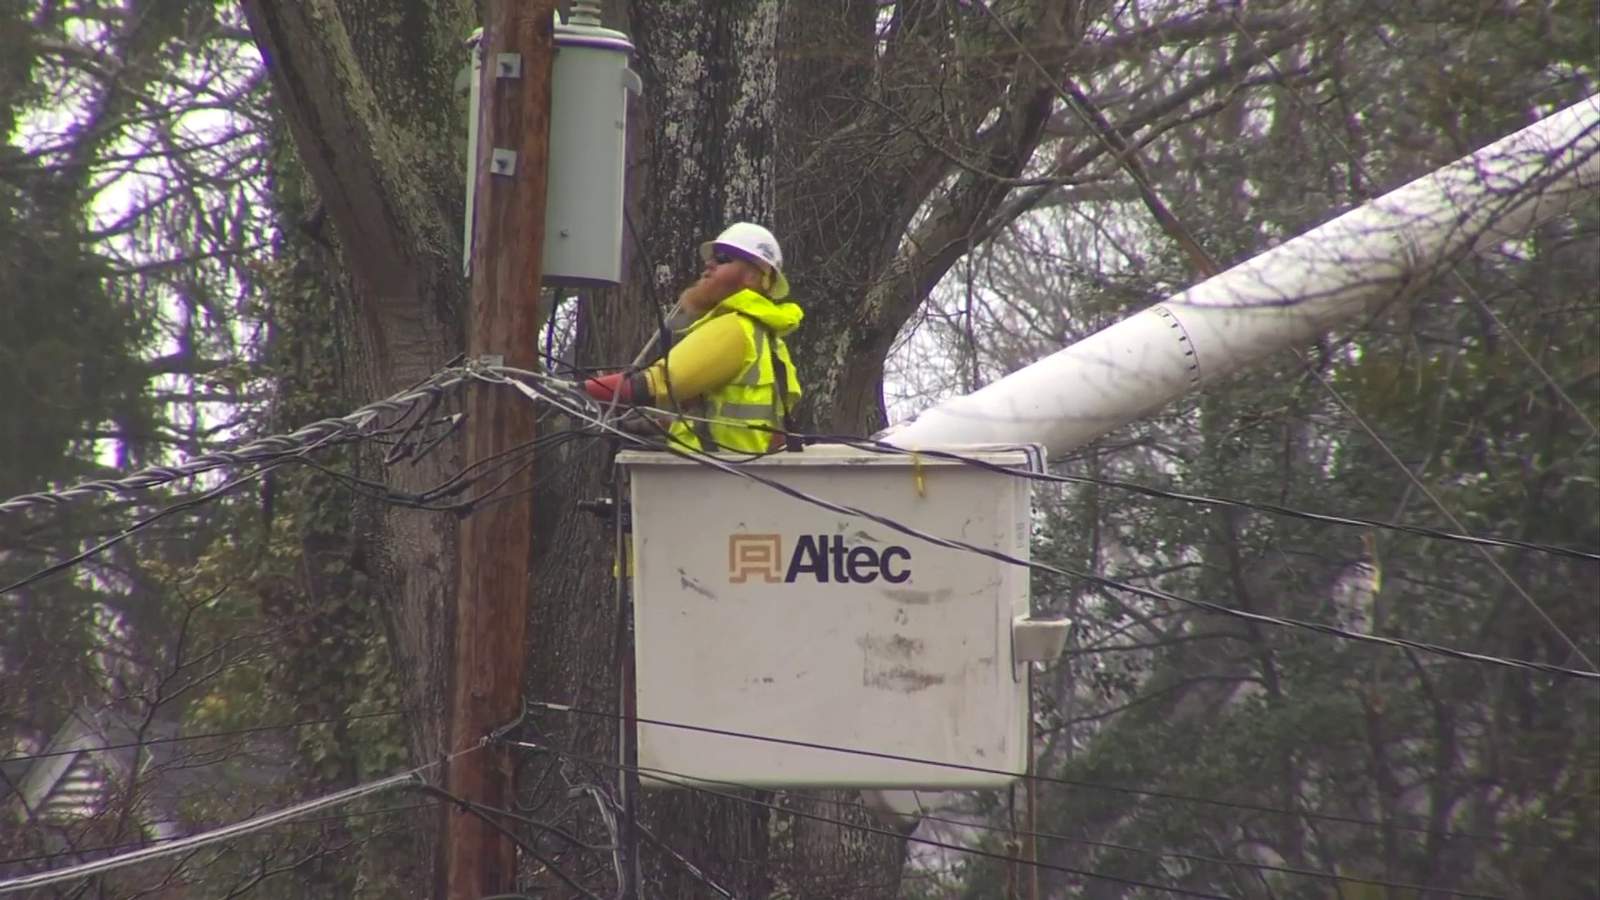 Pittsylvania County declares local state of emergency ahead of Thursday’s ice storm